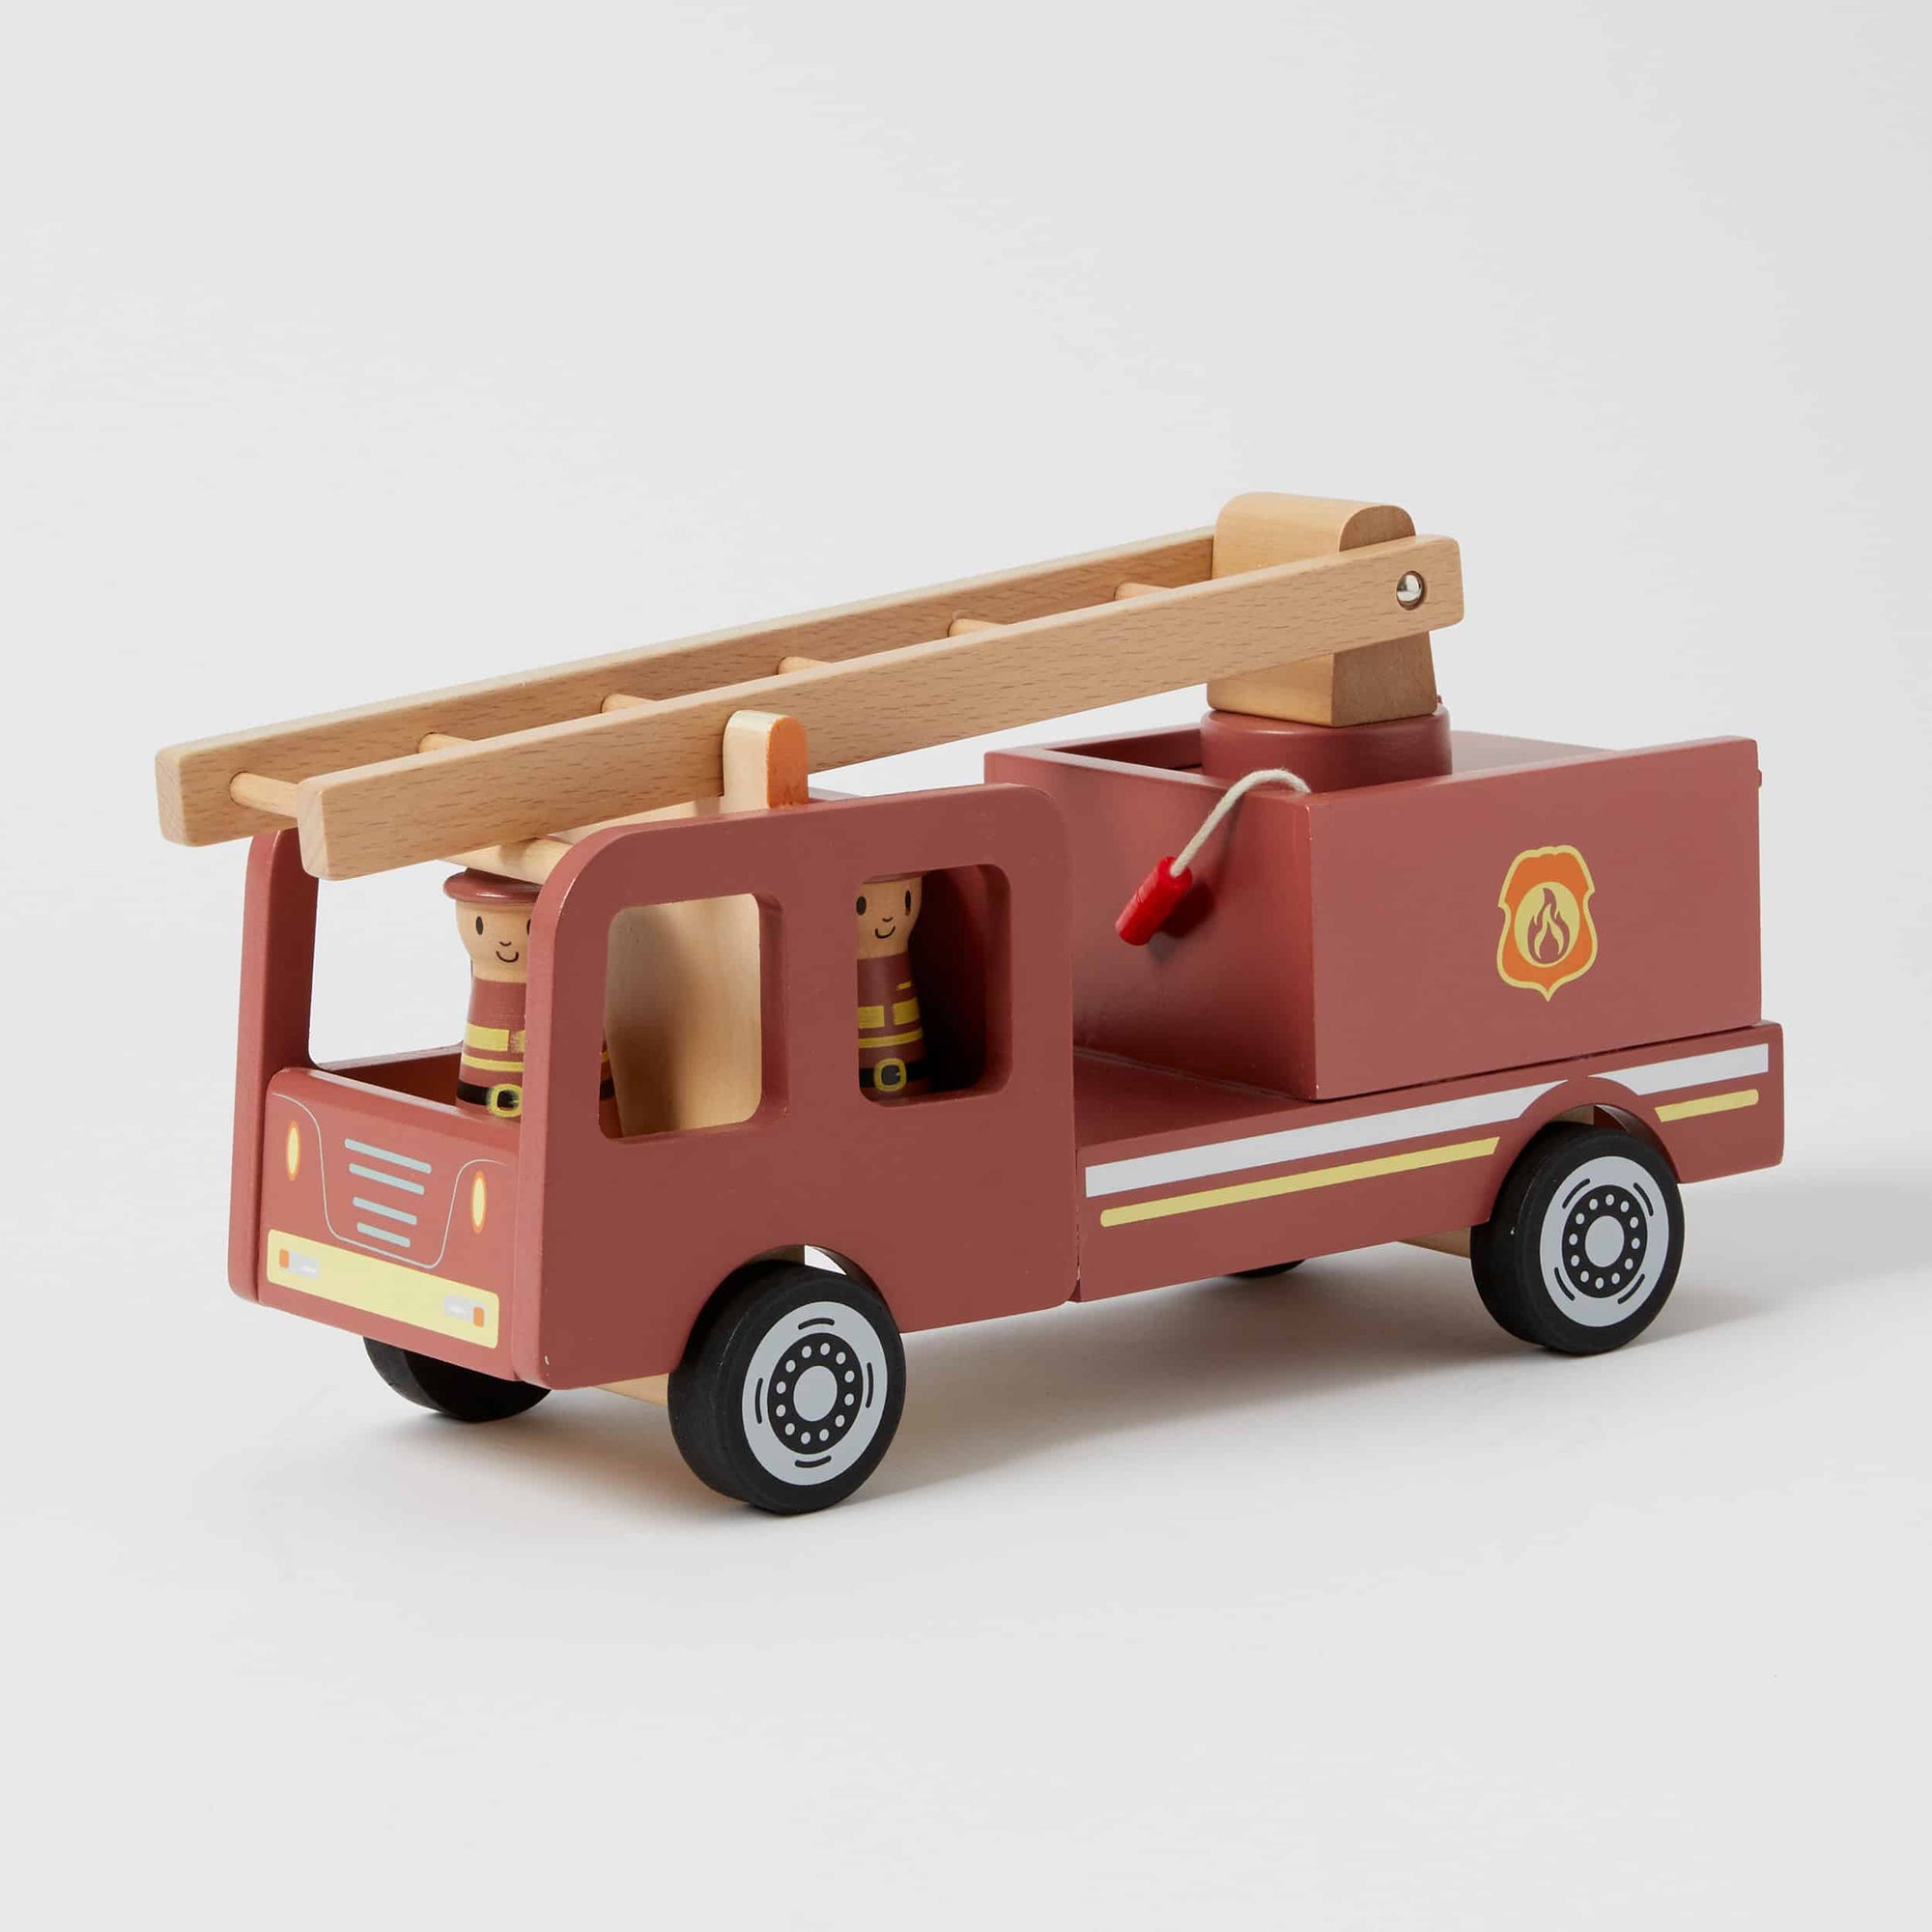 Wooden fire truck set - angus and dudley